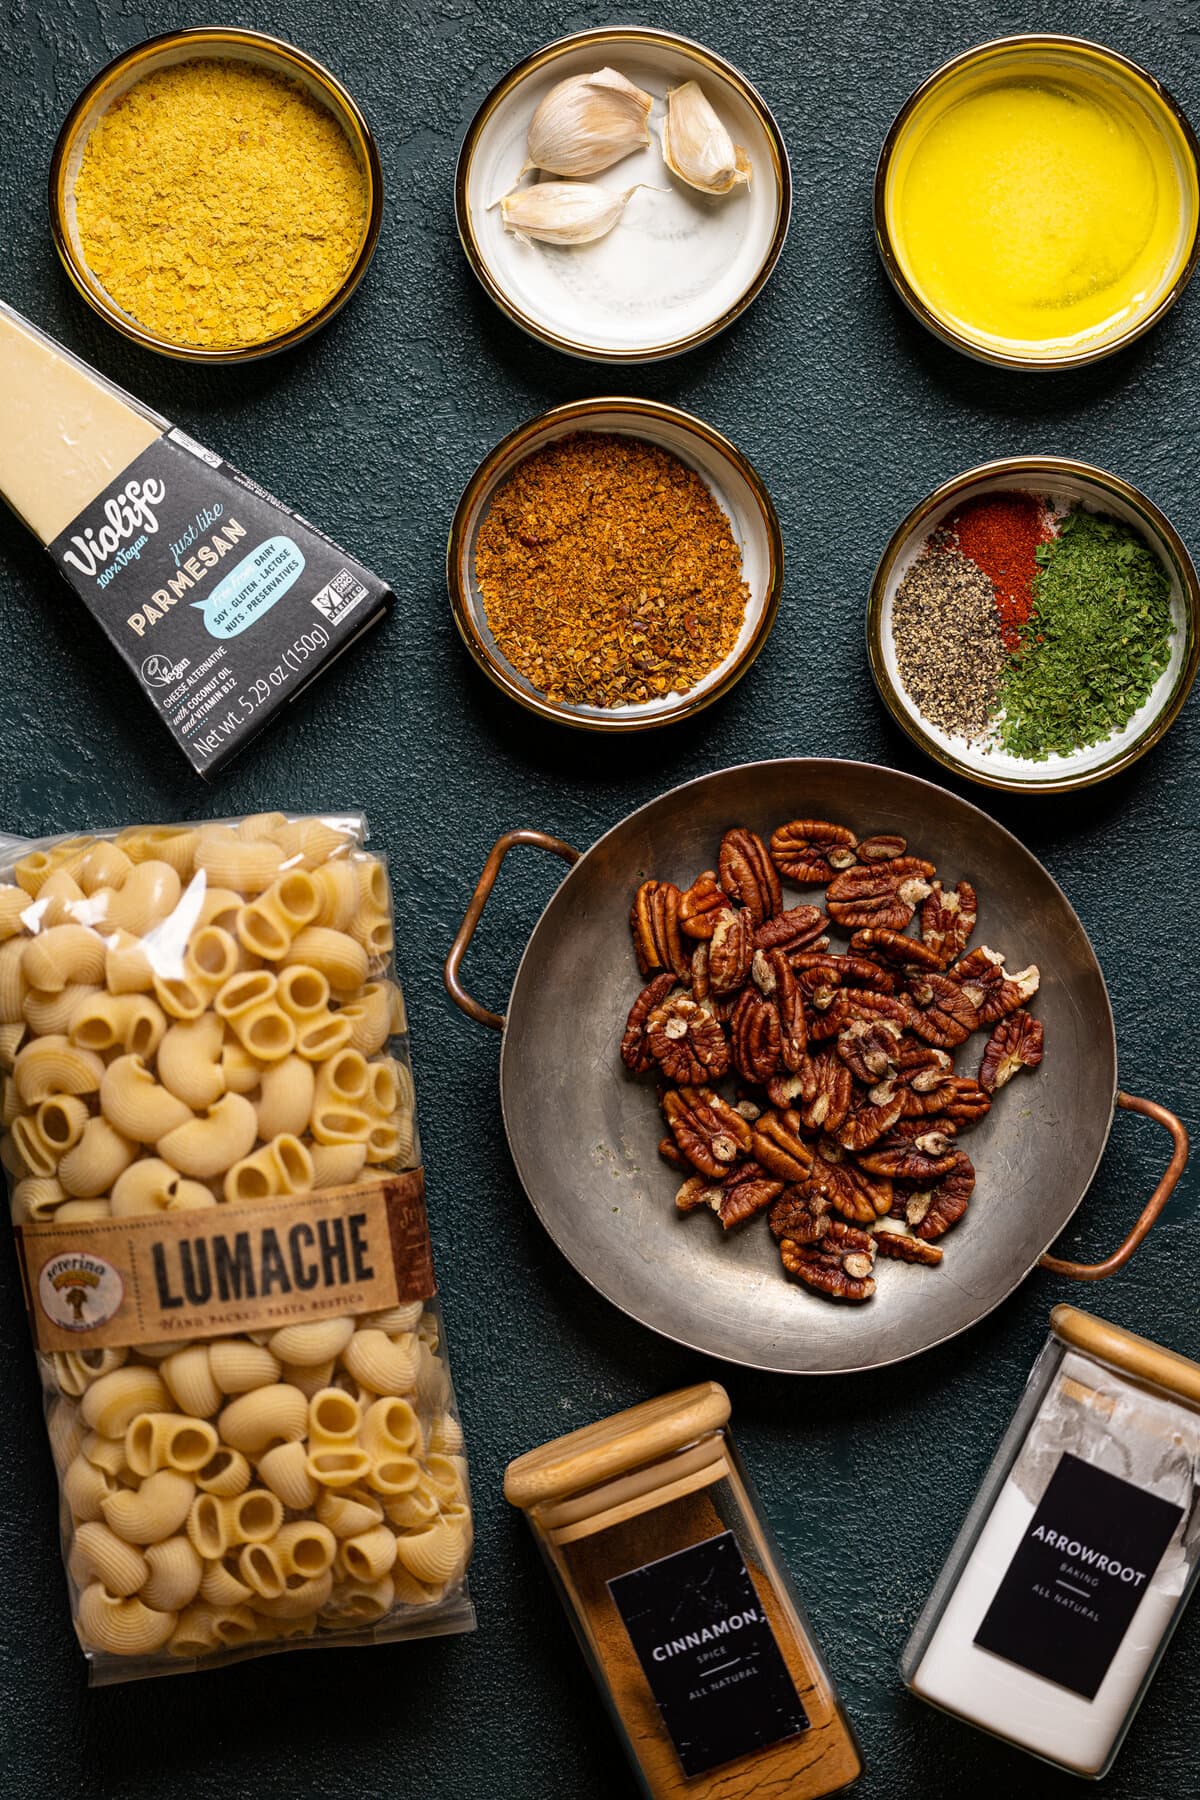 Ingredients for Southern-Style Cajun Pasta with Pecan Breadcrumbs including vegan parmesan, cinnamon, spices, and pasta